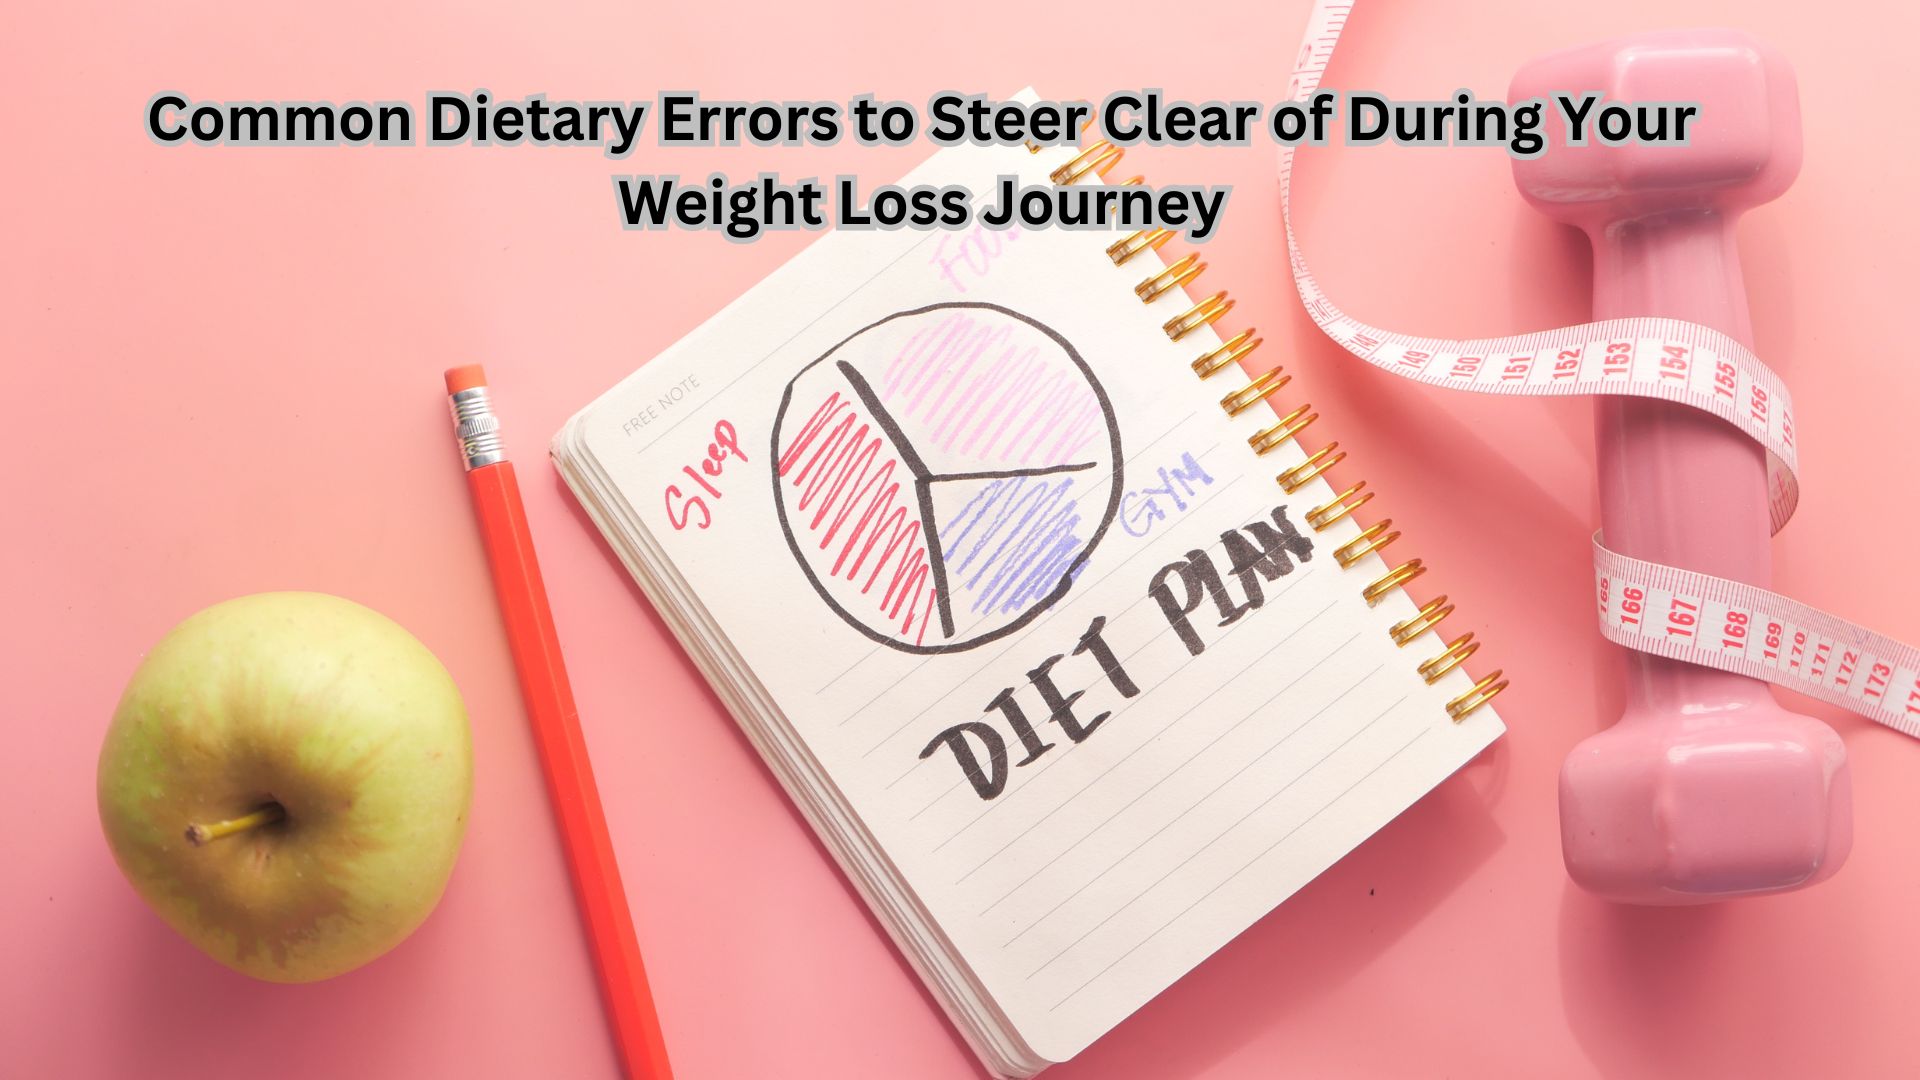 Common Dietary Errors to Steer Clear of During Your Weight Loss Journey